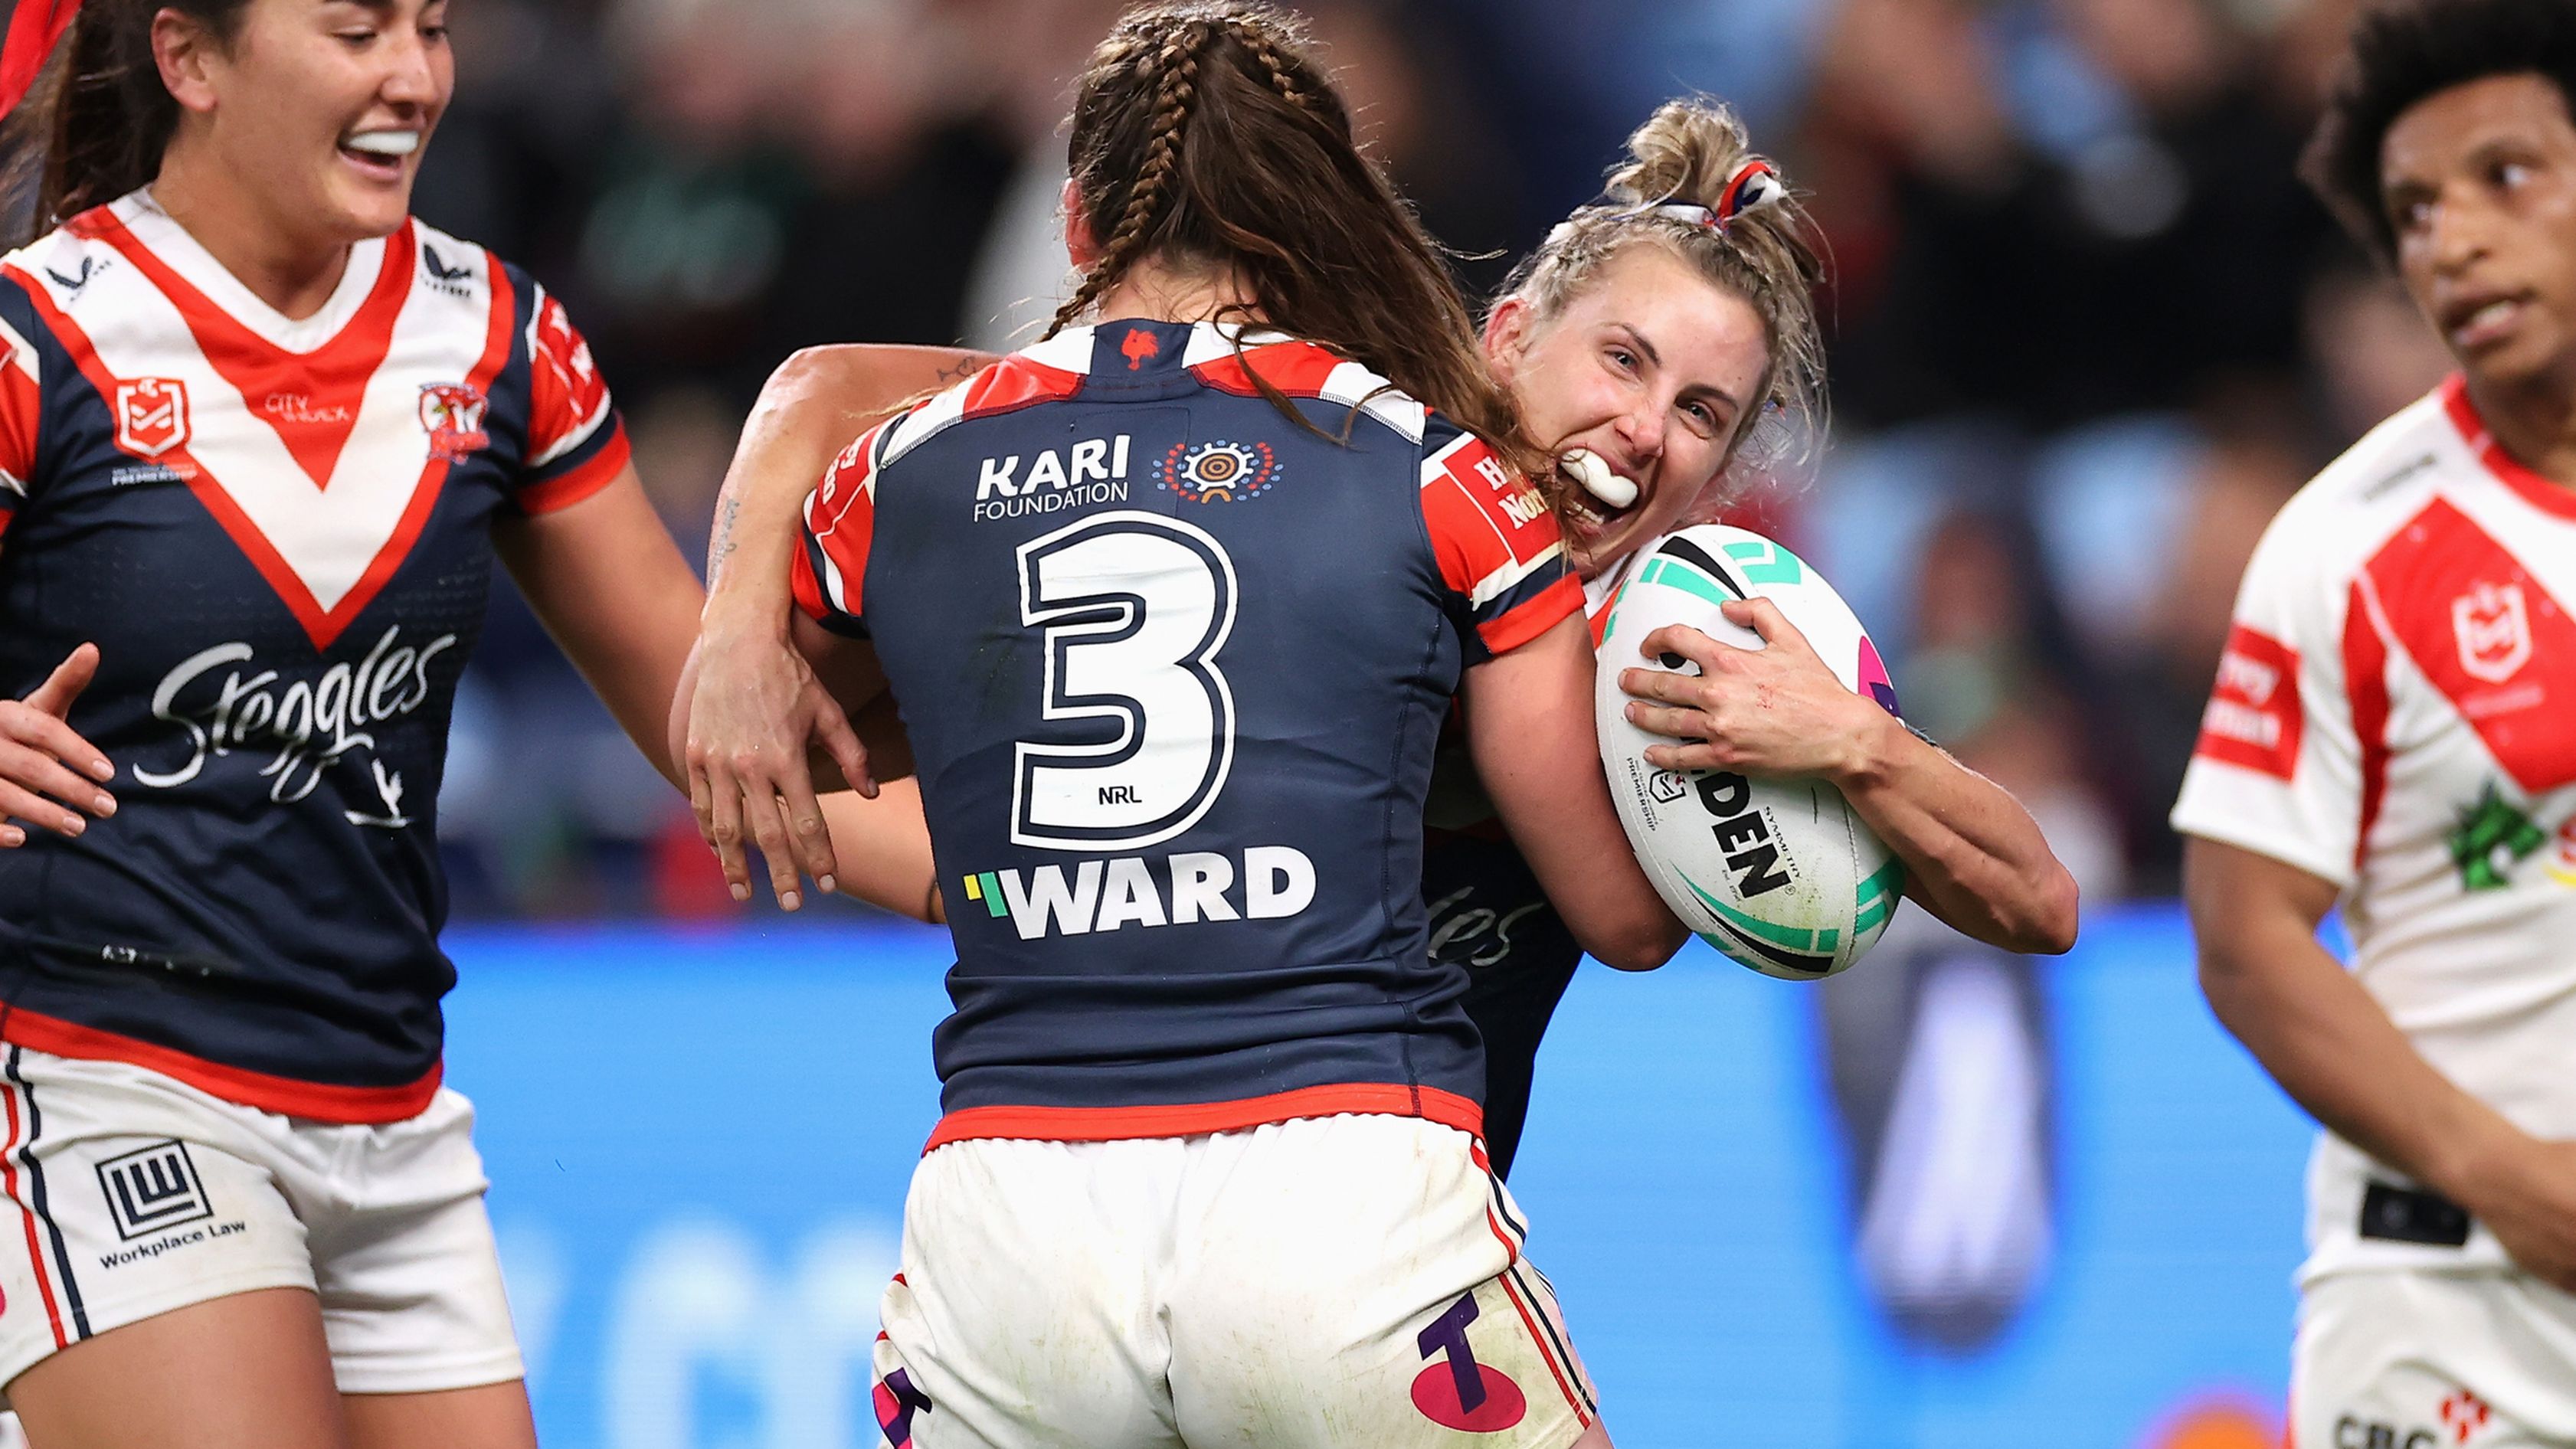 EXCLUSIVE: Legends in awe of mum-of-two's NRLW comeback, set to be capped by prestigious medal